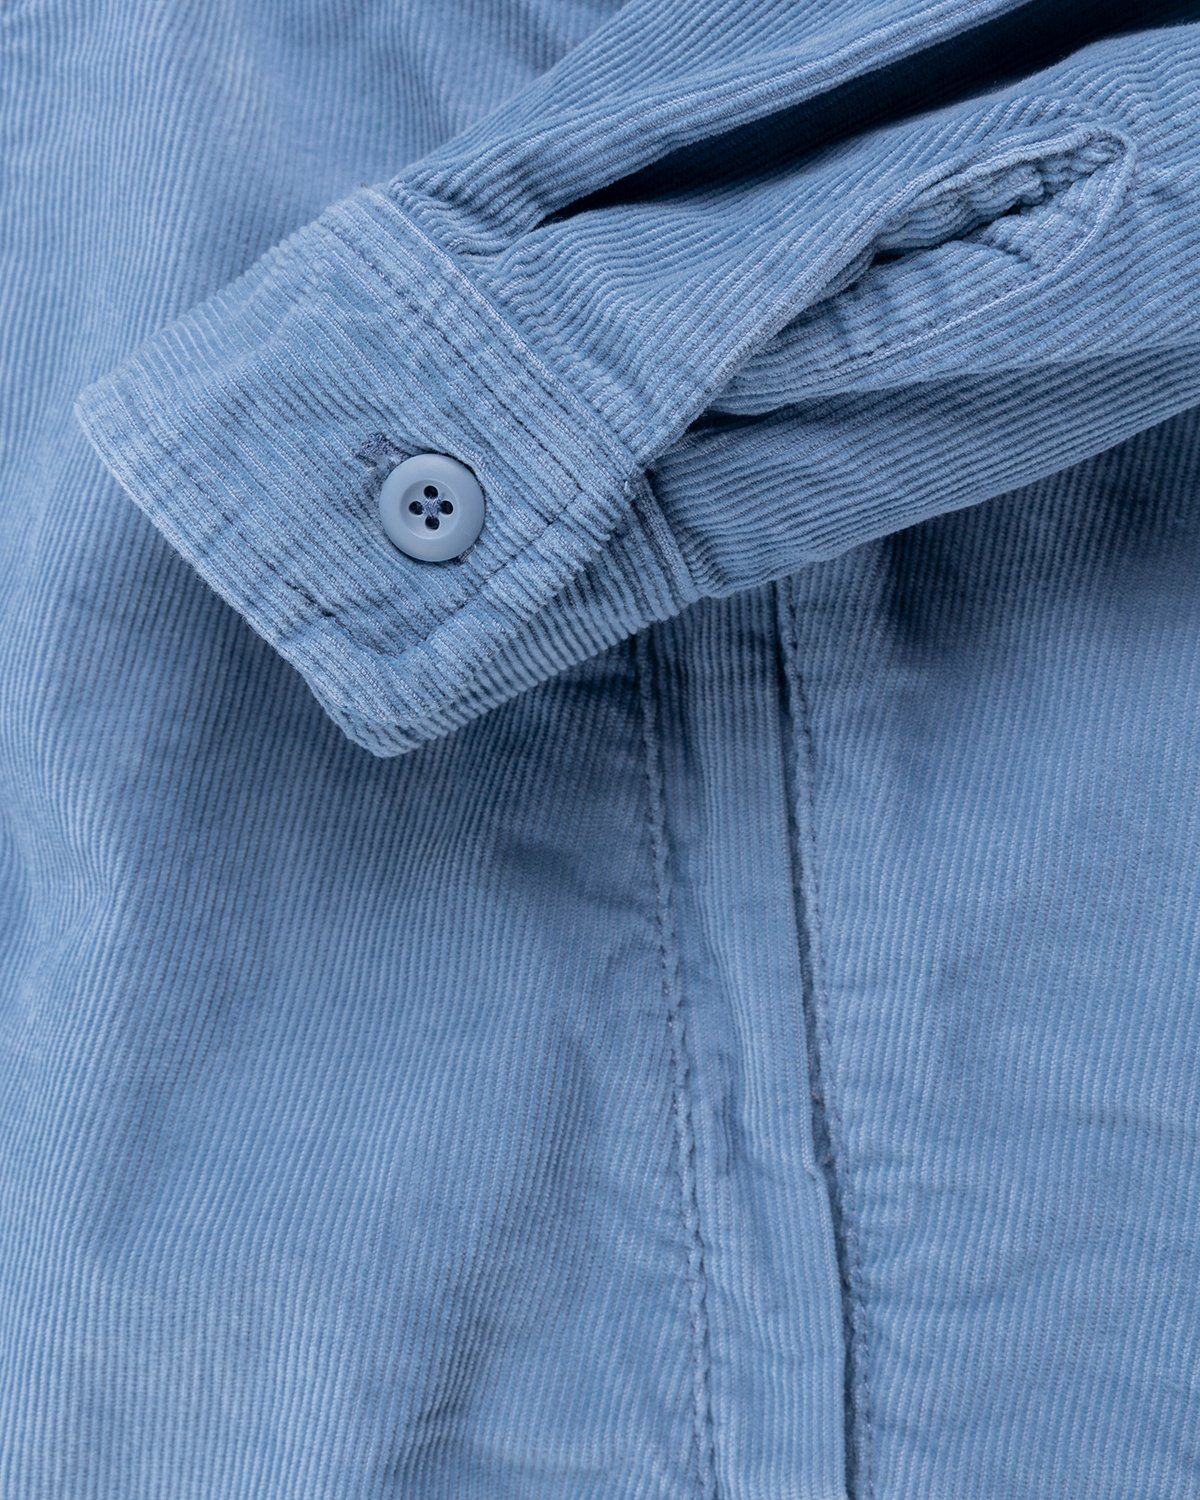 Carhartt WIP – Dixon Shirt Jacket Icy Water Rinsed - Outerwear - Blue - Image 4